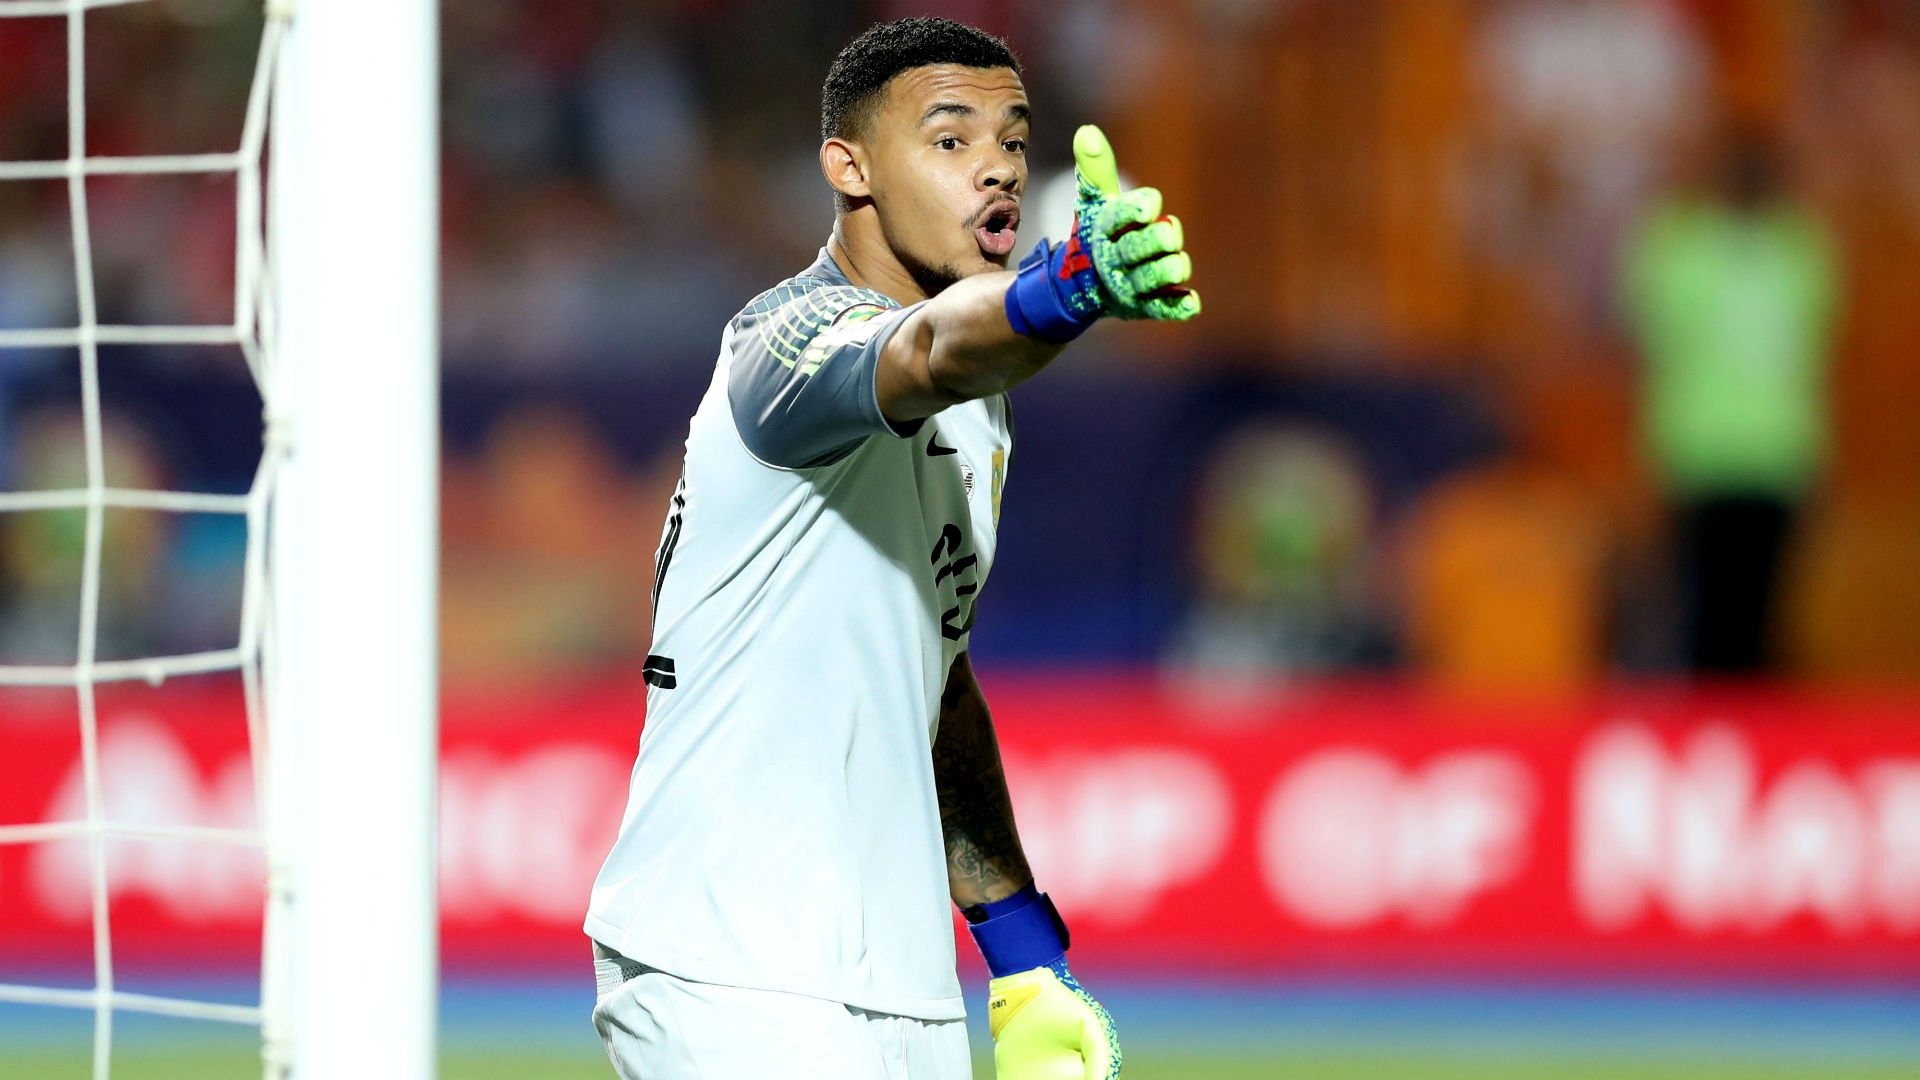 AFCON: Ronwen Williams' 4 penalty saves not luck - South Africa coach